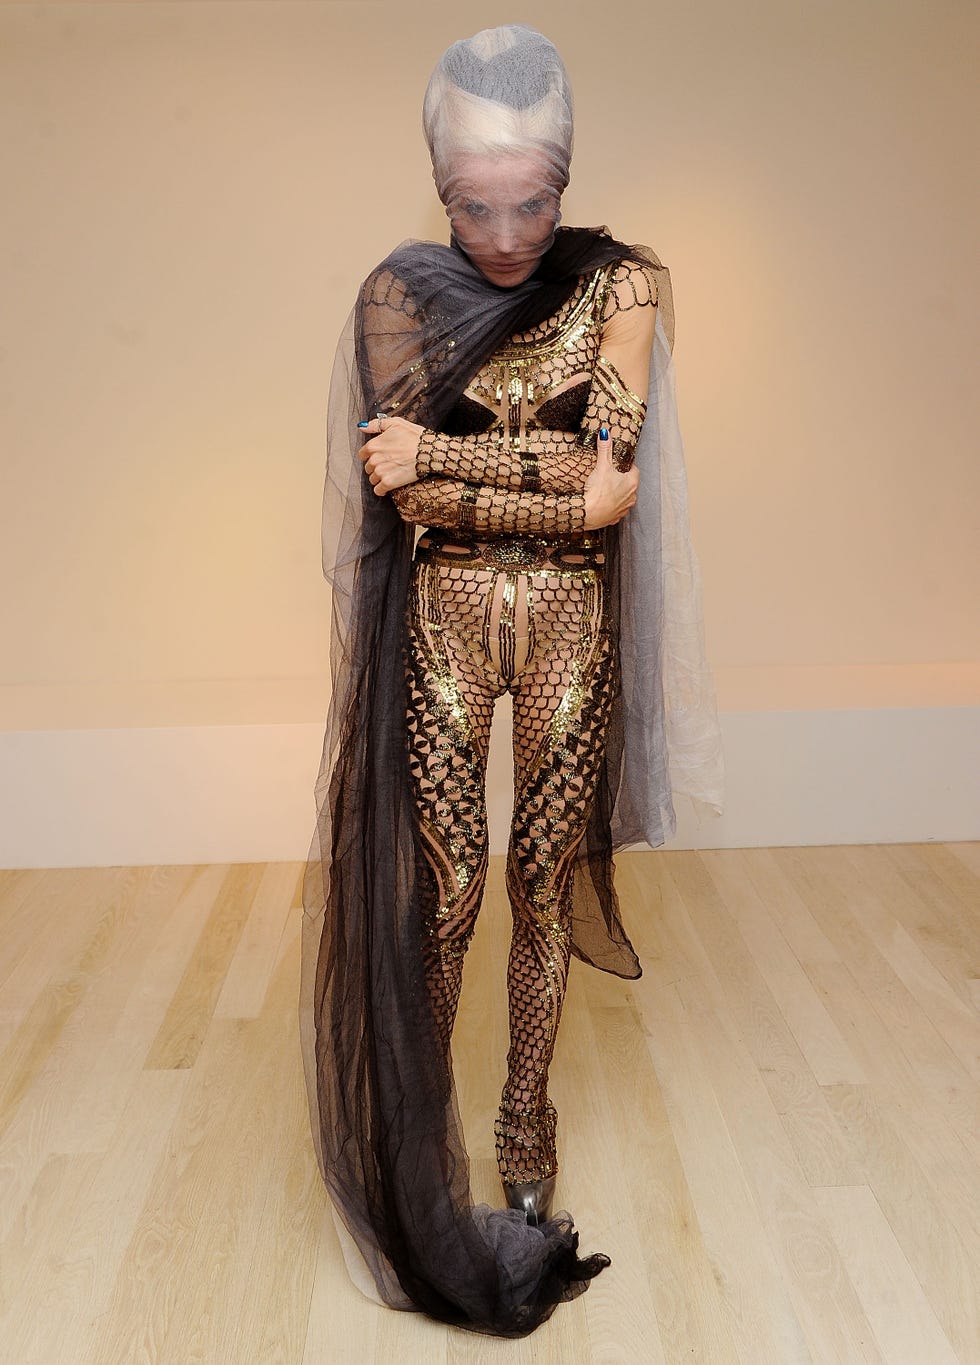 barneys new york features daphne guinness preparing for the met gala in madison avenue windows